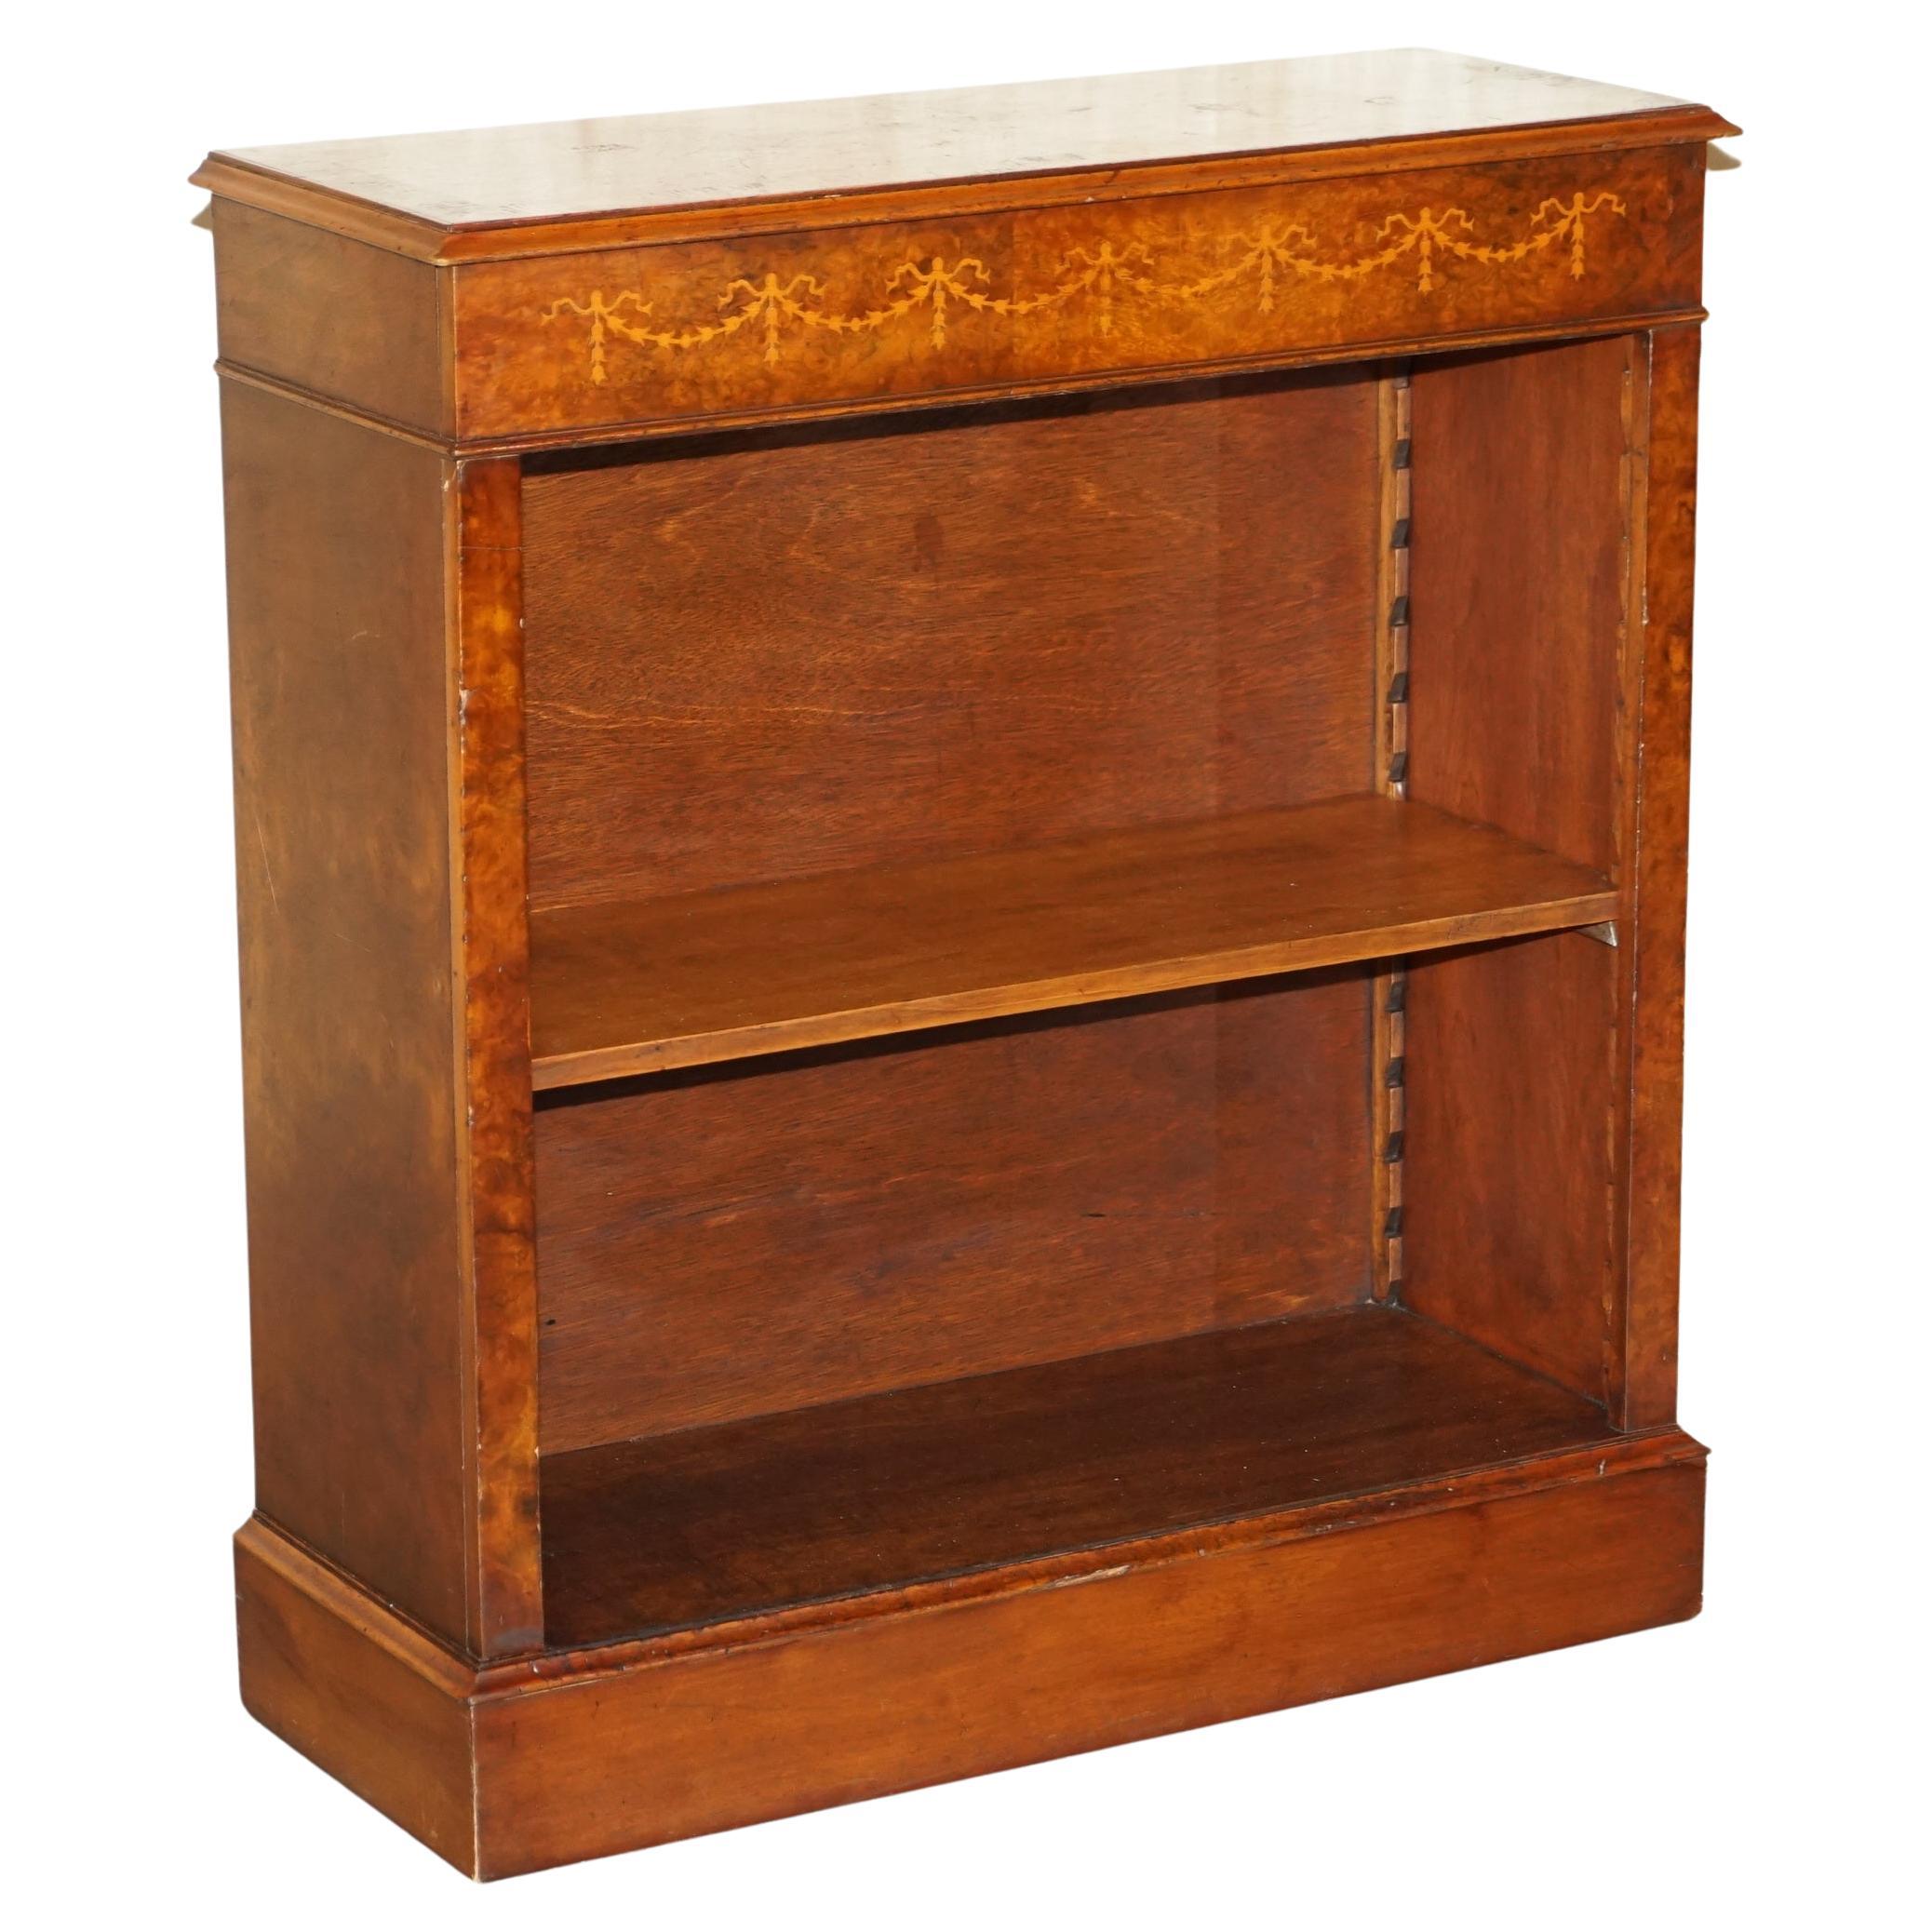 Brights of Nettlebed Sheraton Burr Elm Walnut Inlay Dwarf Library Open Bookcase For Sale